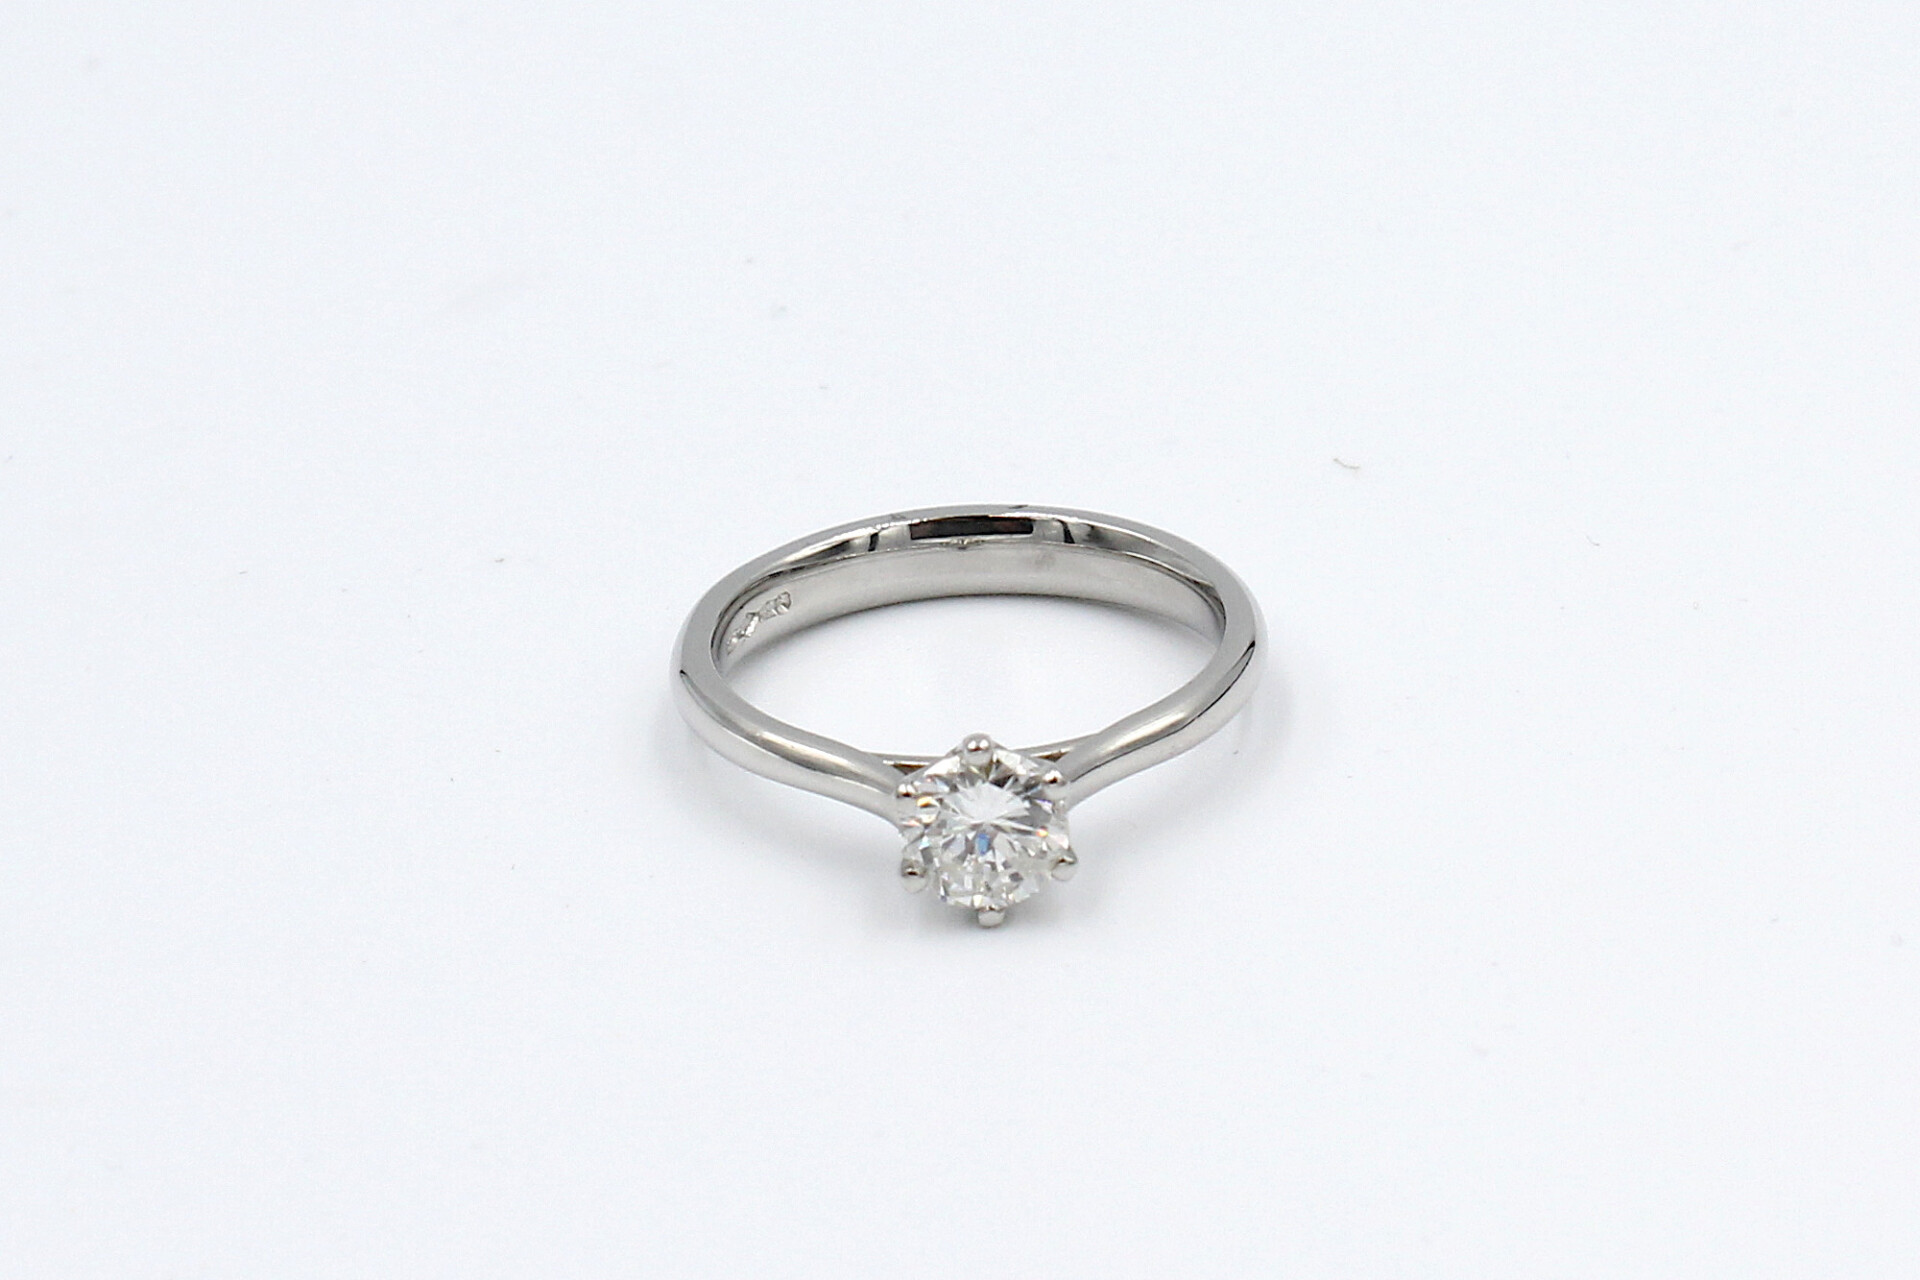 top view of a platinum diamond solitaire ring